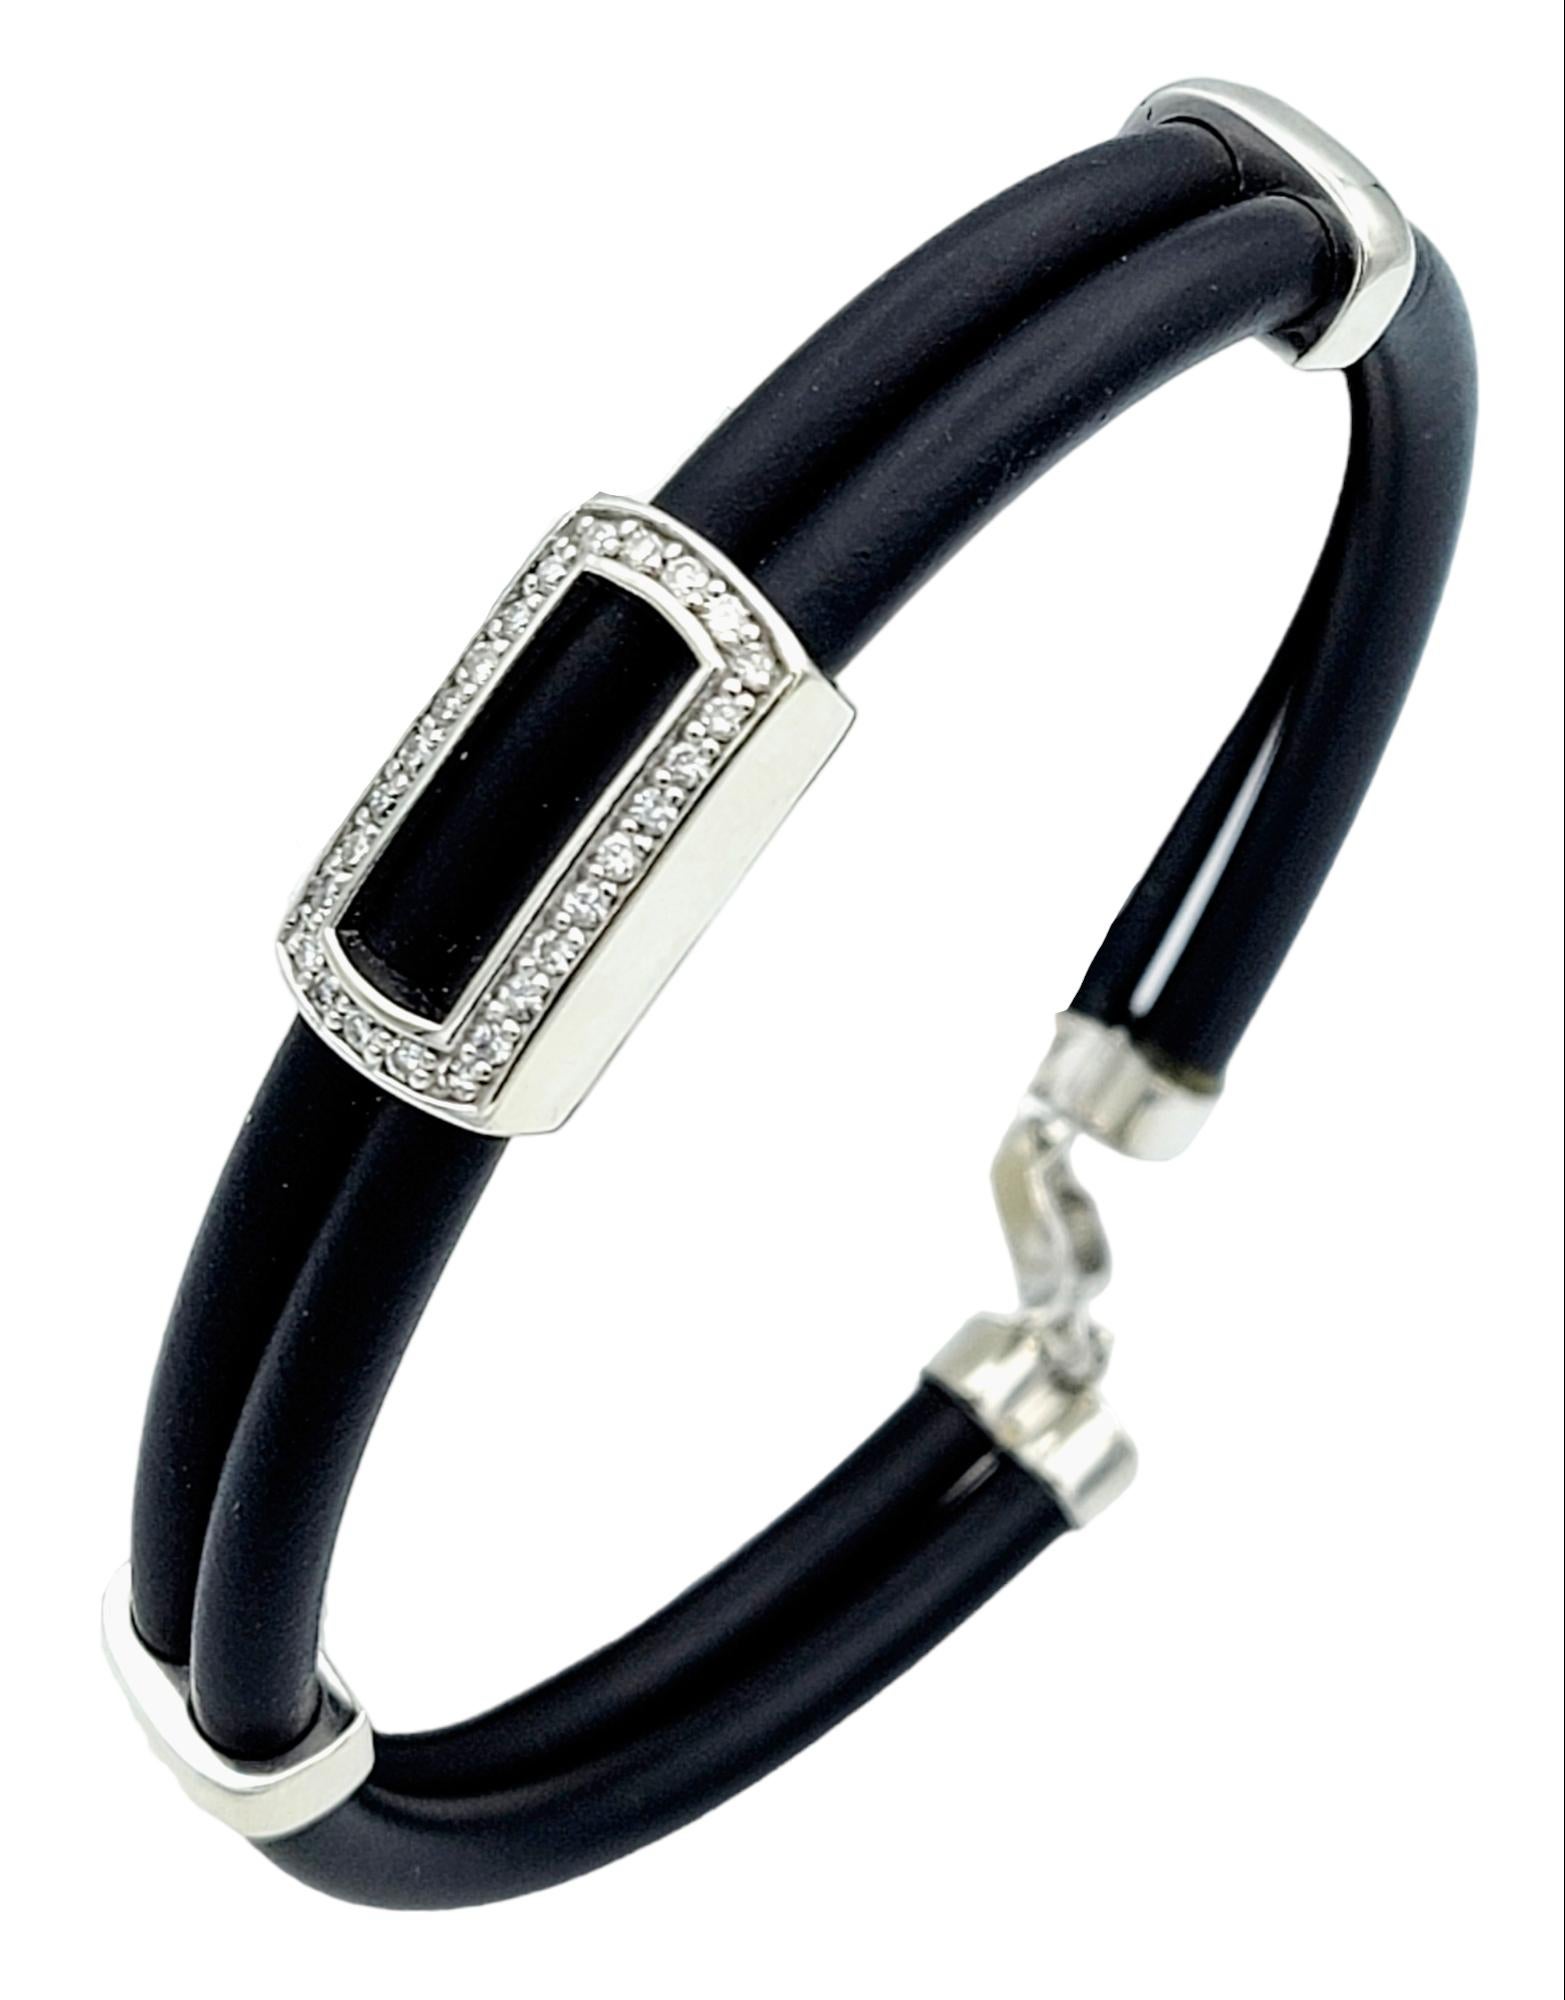 This Effy black rubber cord bracelet is a striking fusion of modern design and timeless sophistication. Crafted with meticulous attention to detail, this piece exudes a contemporary edge while maintaining an air of understated elegance.

The